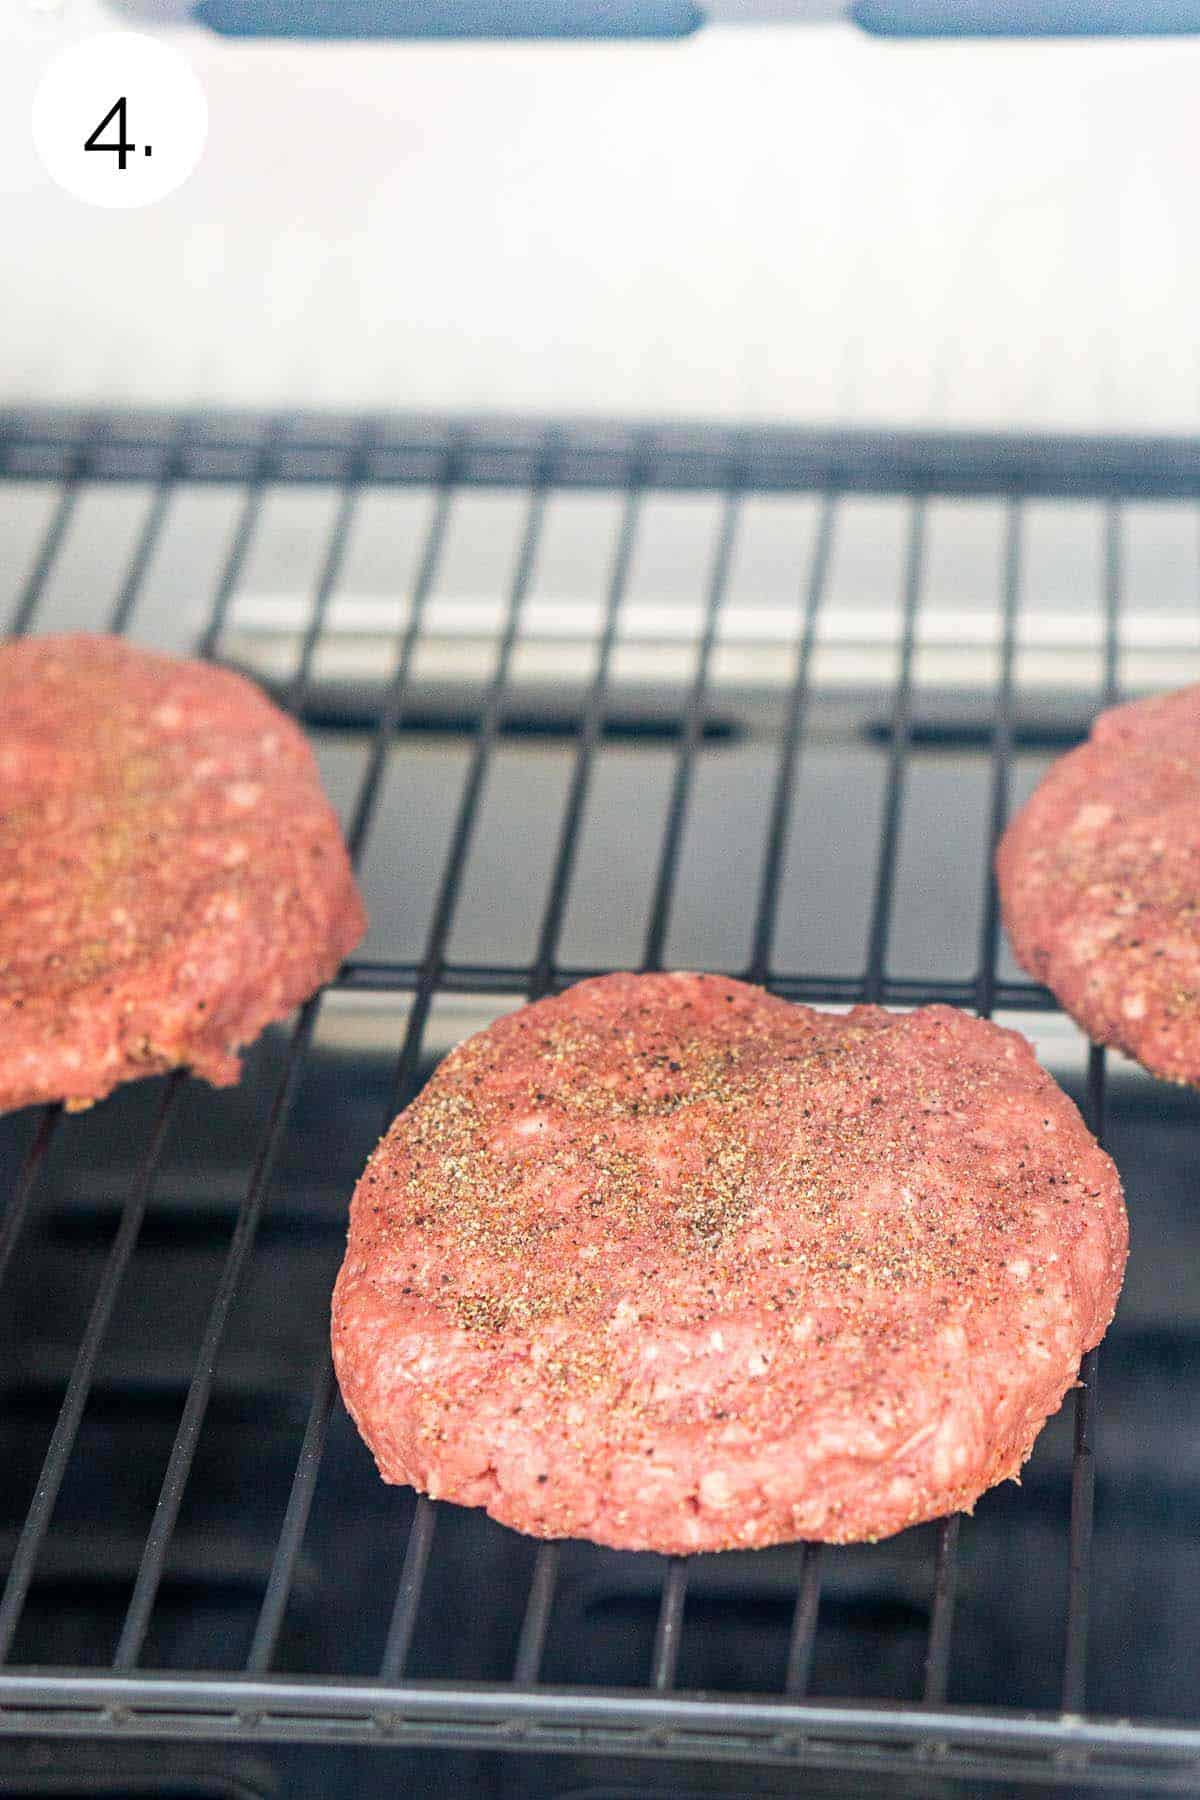 The burger patties on the grill grates before smoking.